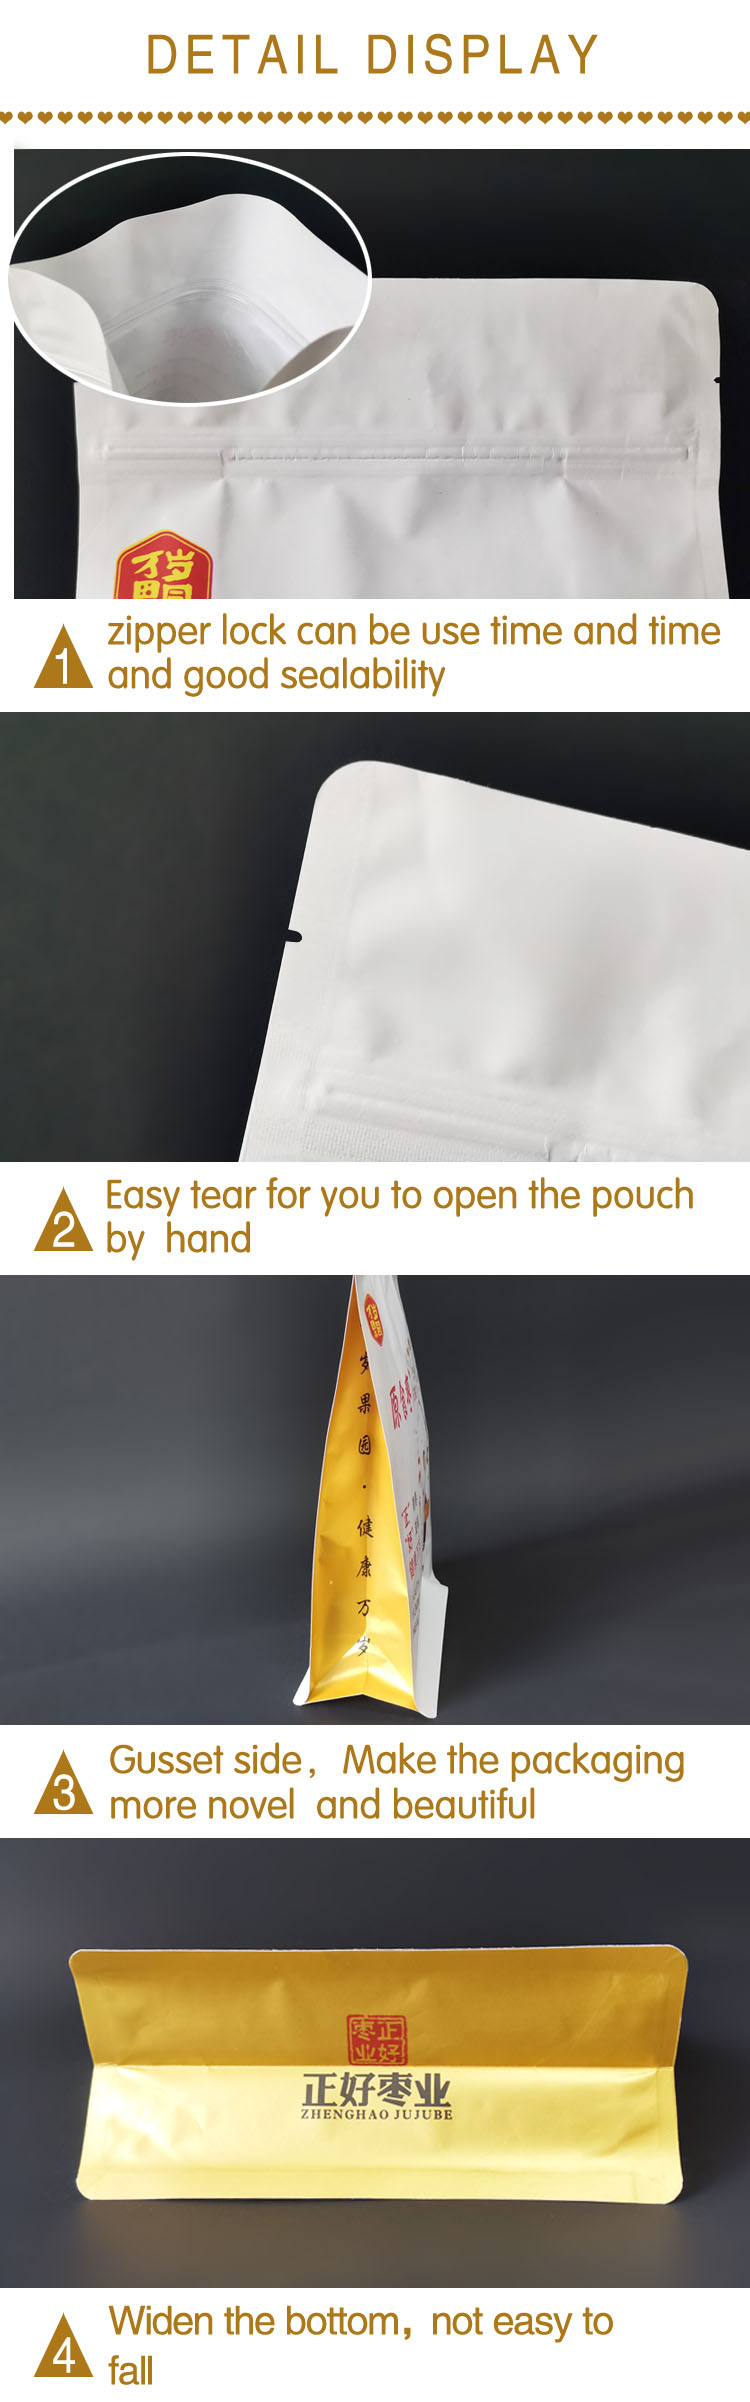 biodegradable laminating pouches flat bottom recyclable pouch snack food white Kraft paper pouch